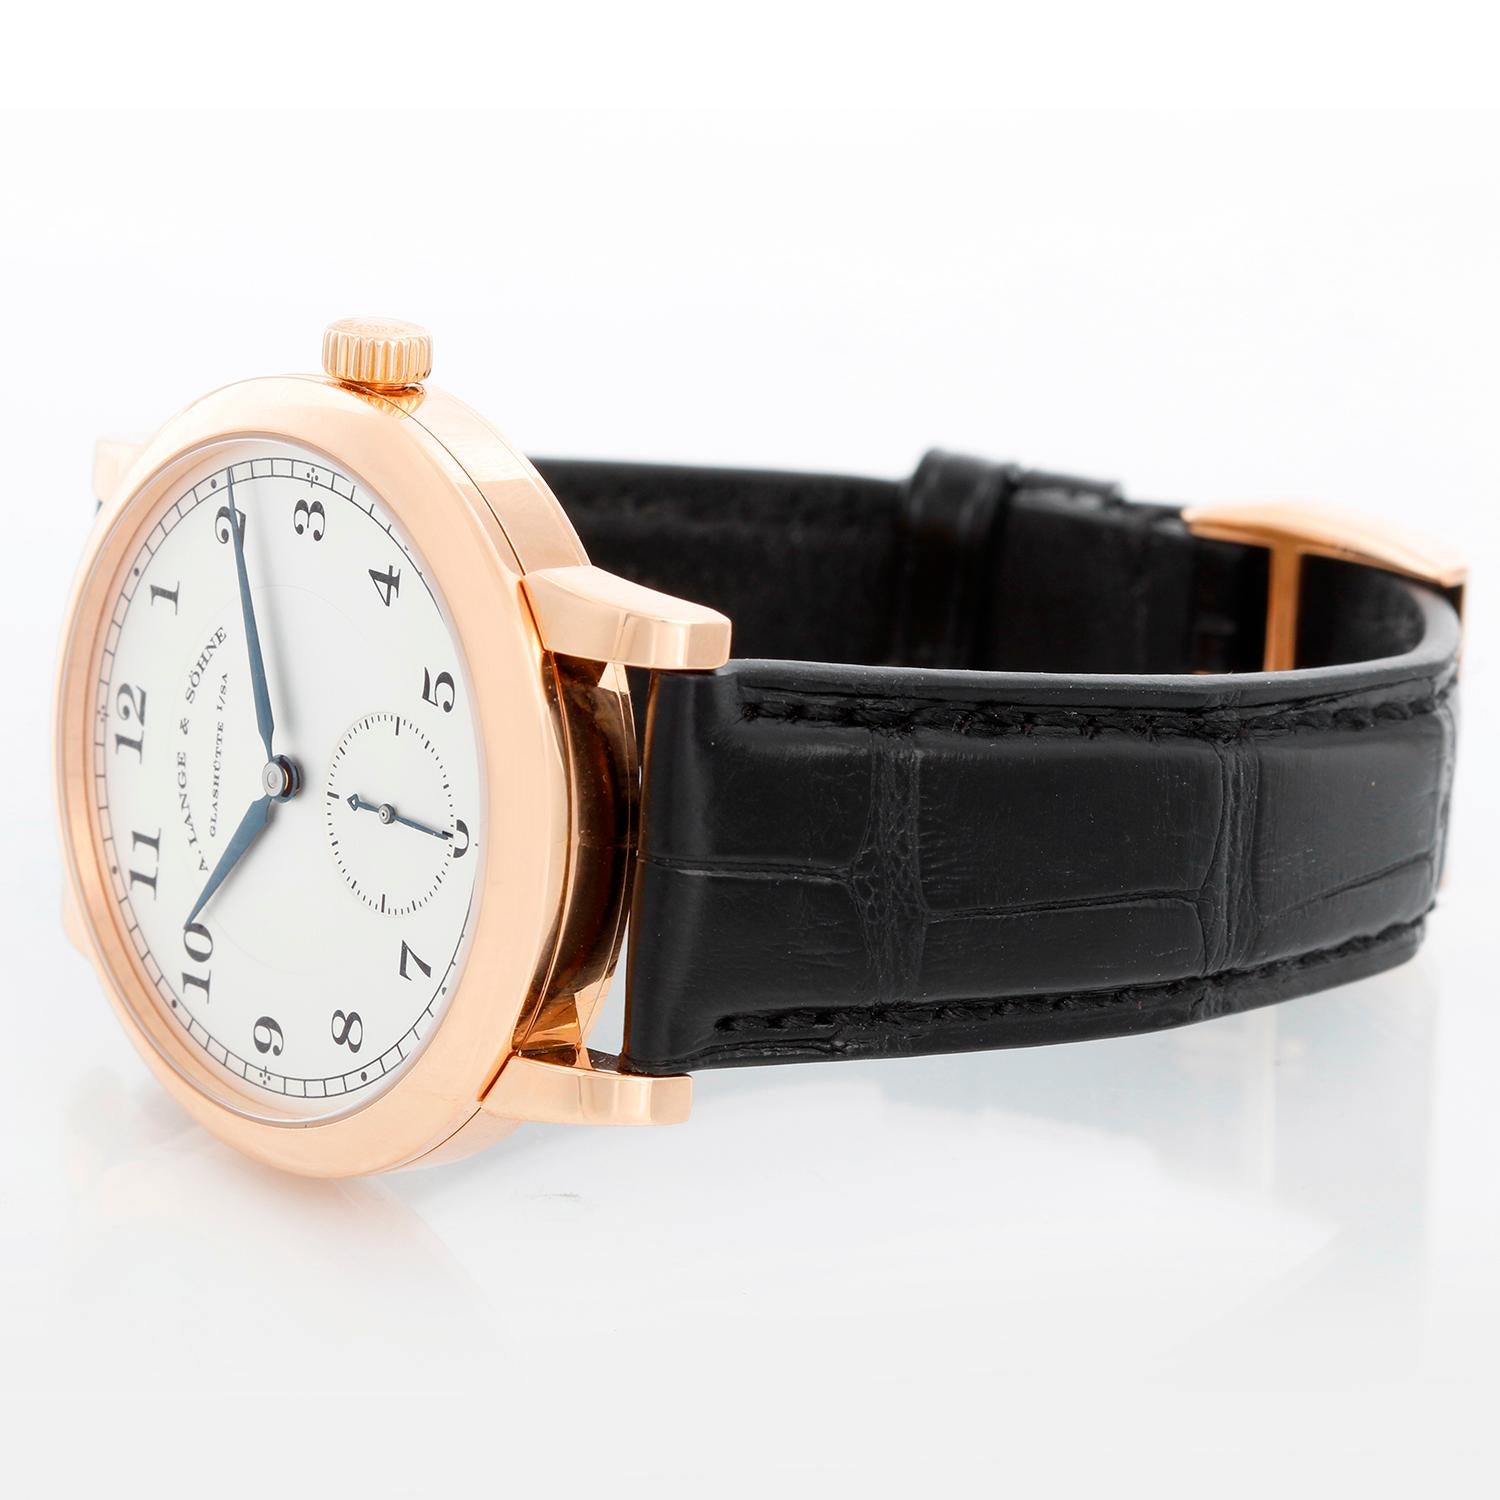 A. Lange & Sohne 1815 Men's 18k Rose Gold Watch - Manual winding. 18k rose gold case (40mm diameter). Silver dial with Arabic numerals; sub-seconds dial. Strap band with 18k rose gold tang clasp. Pre-owned with A Lange & Sohne box. 